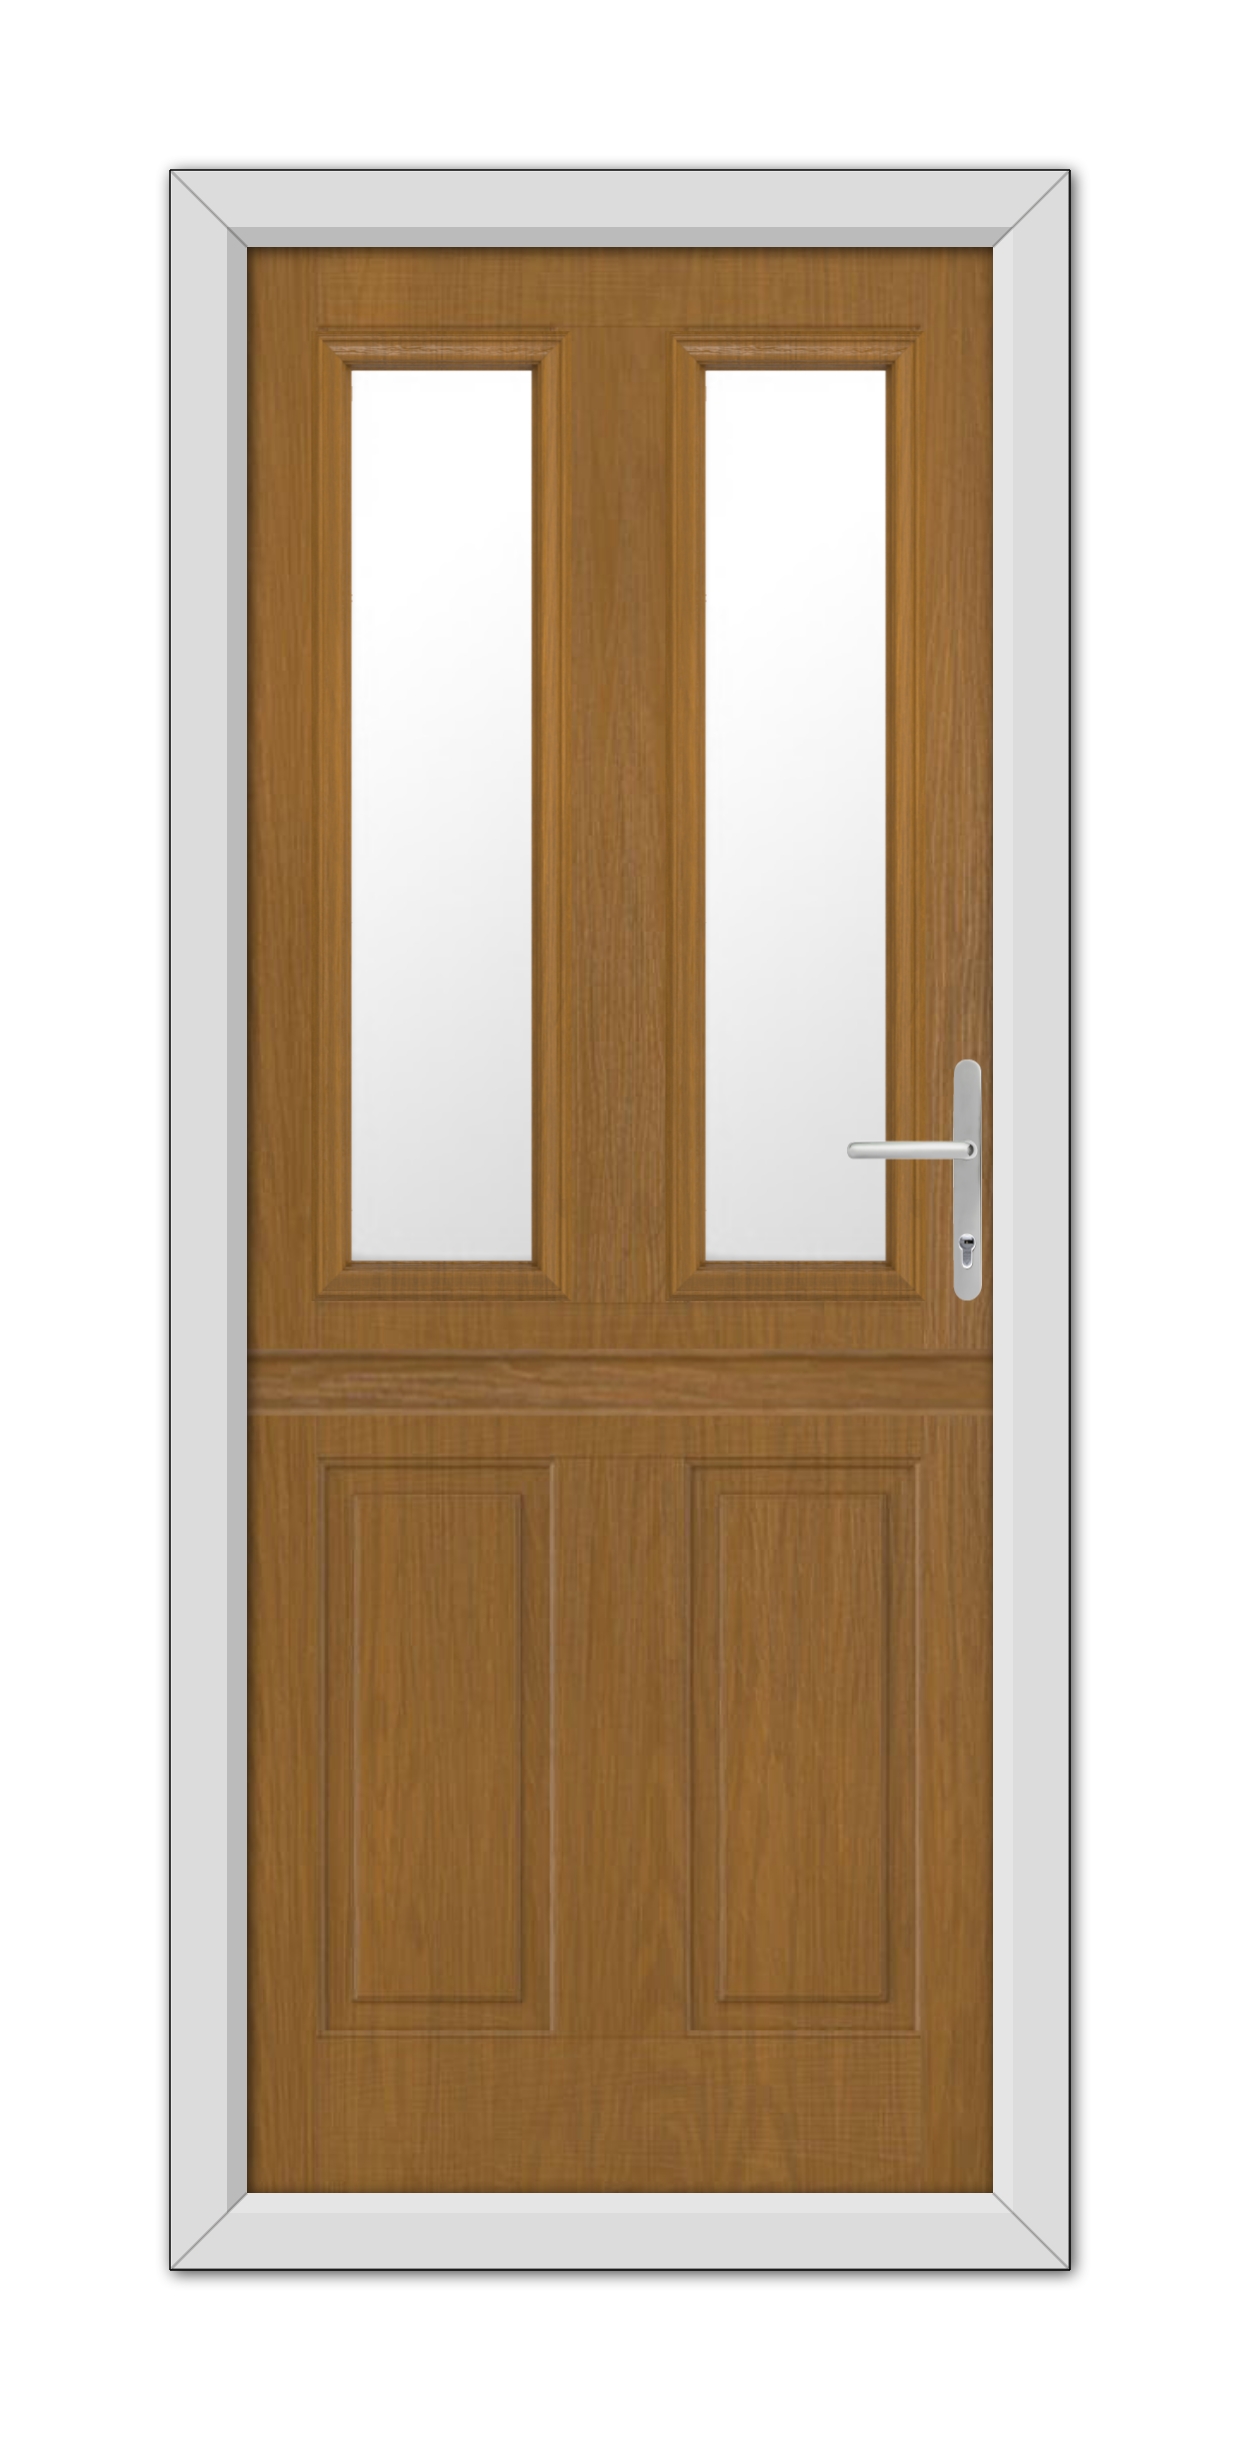 A modern Oak Whitmore Stable Composite Door 48mm Timber Core with glass panels on the upper half and a metal handle on the right, set within a white frame.